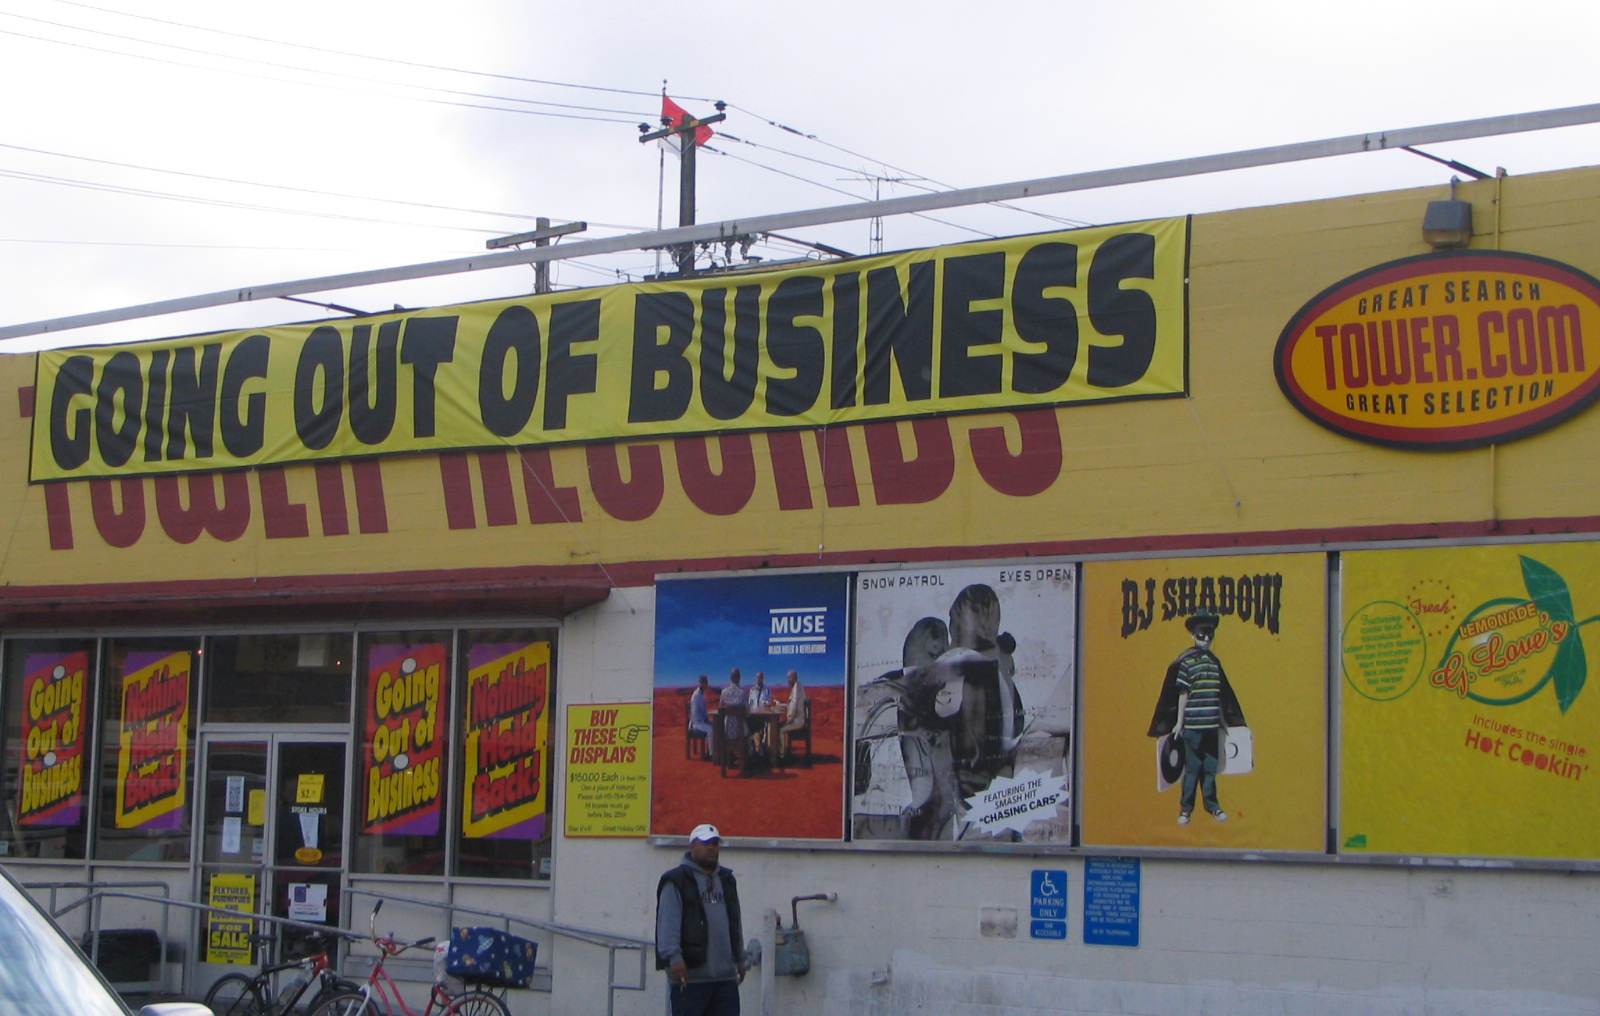 The last days of the San Francisco branch of Tower Records showing the Twoer Records logo on the storefront covered with a "Going Out of Business" banner.